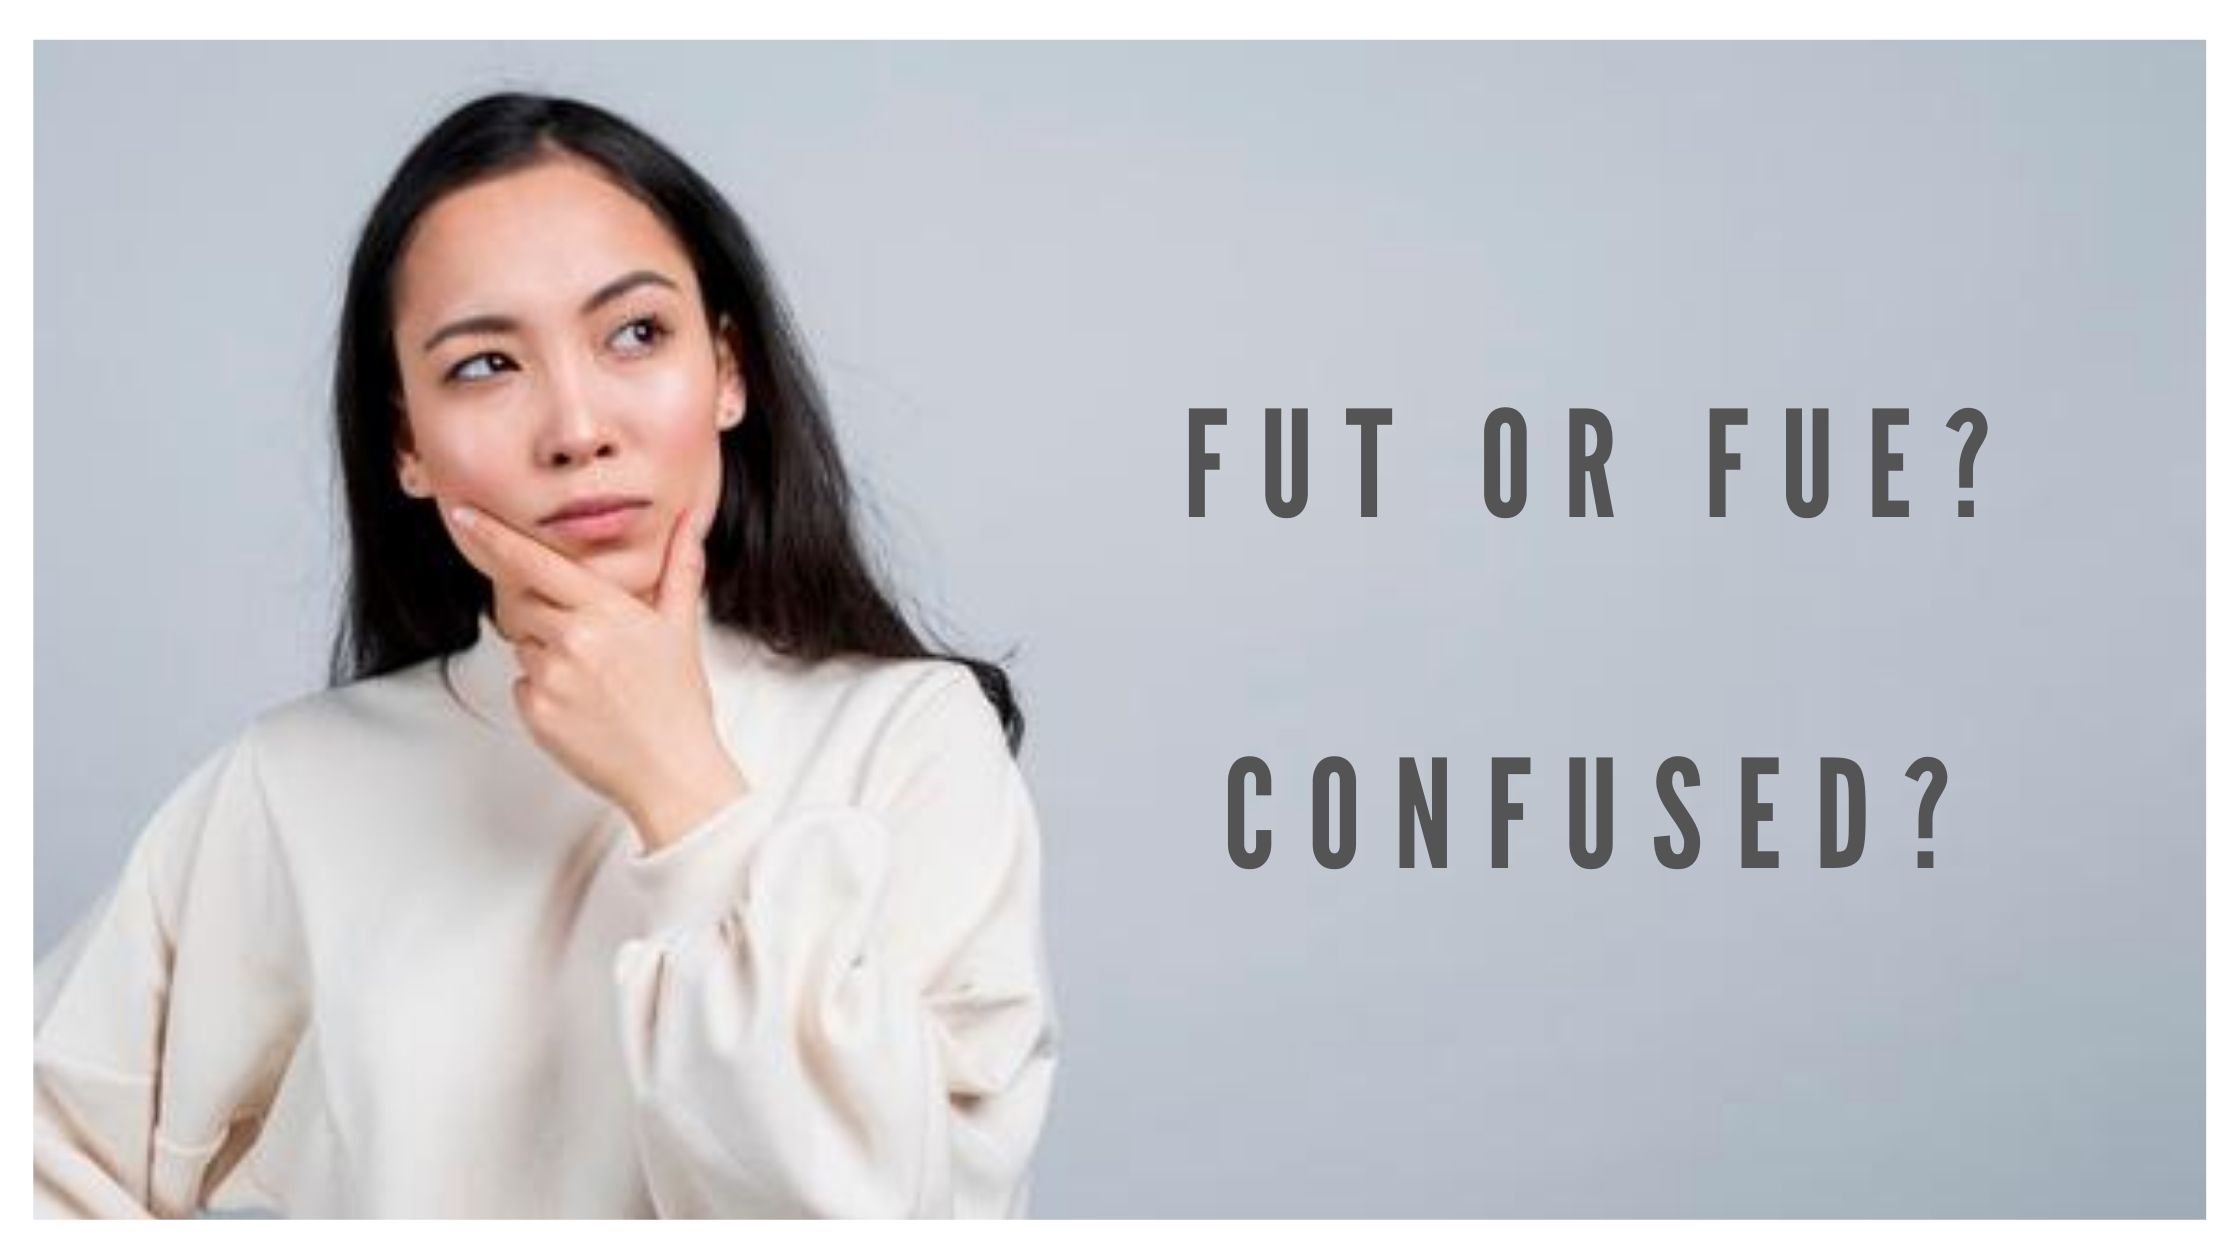 FUT or FUE – Which Is The Better Hair Transplant?